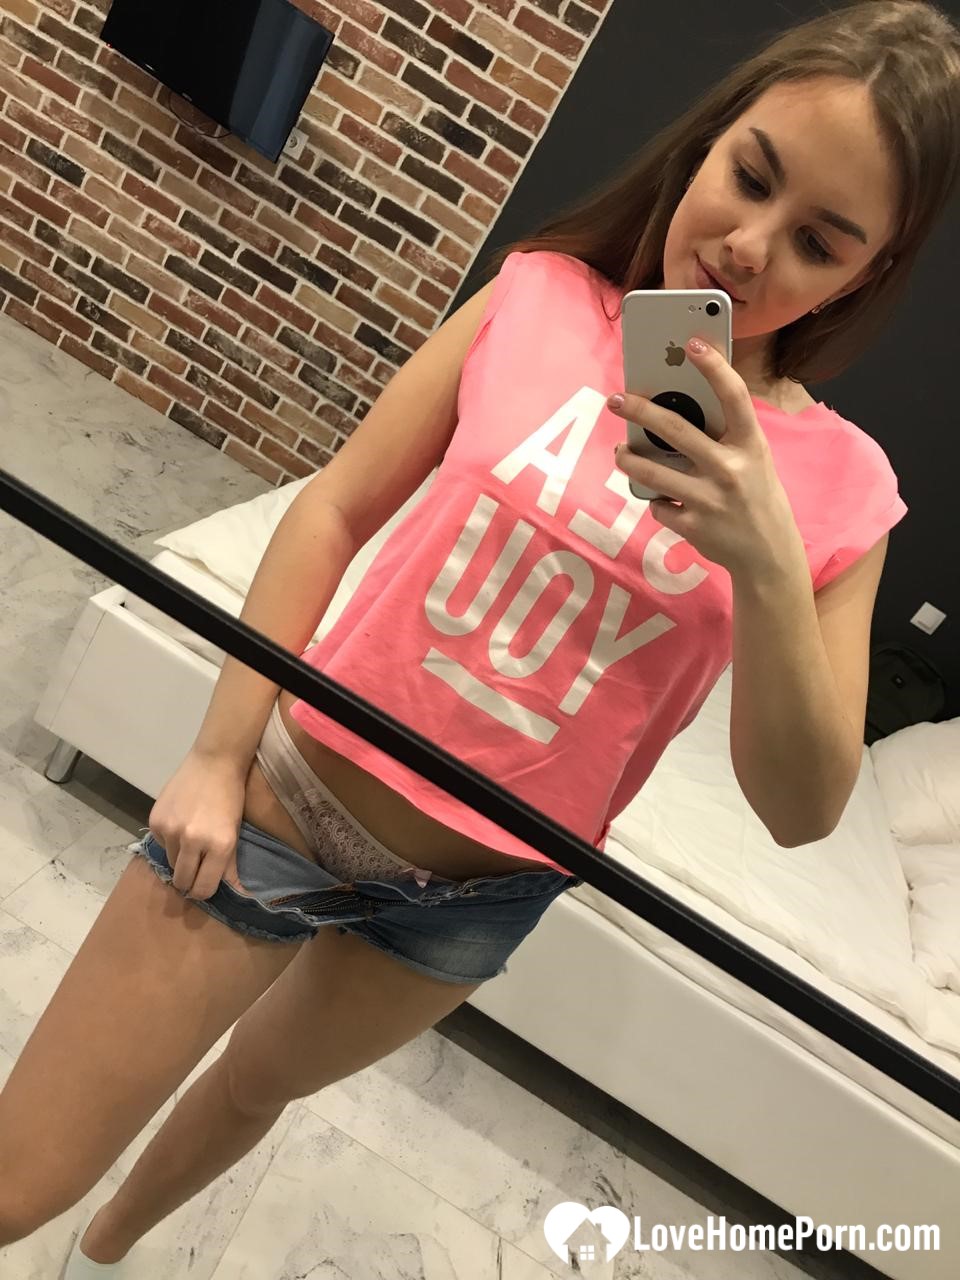 Horny teen plays with her phone while flashing